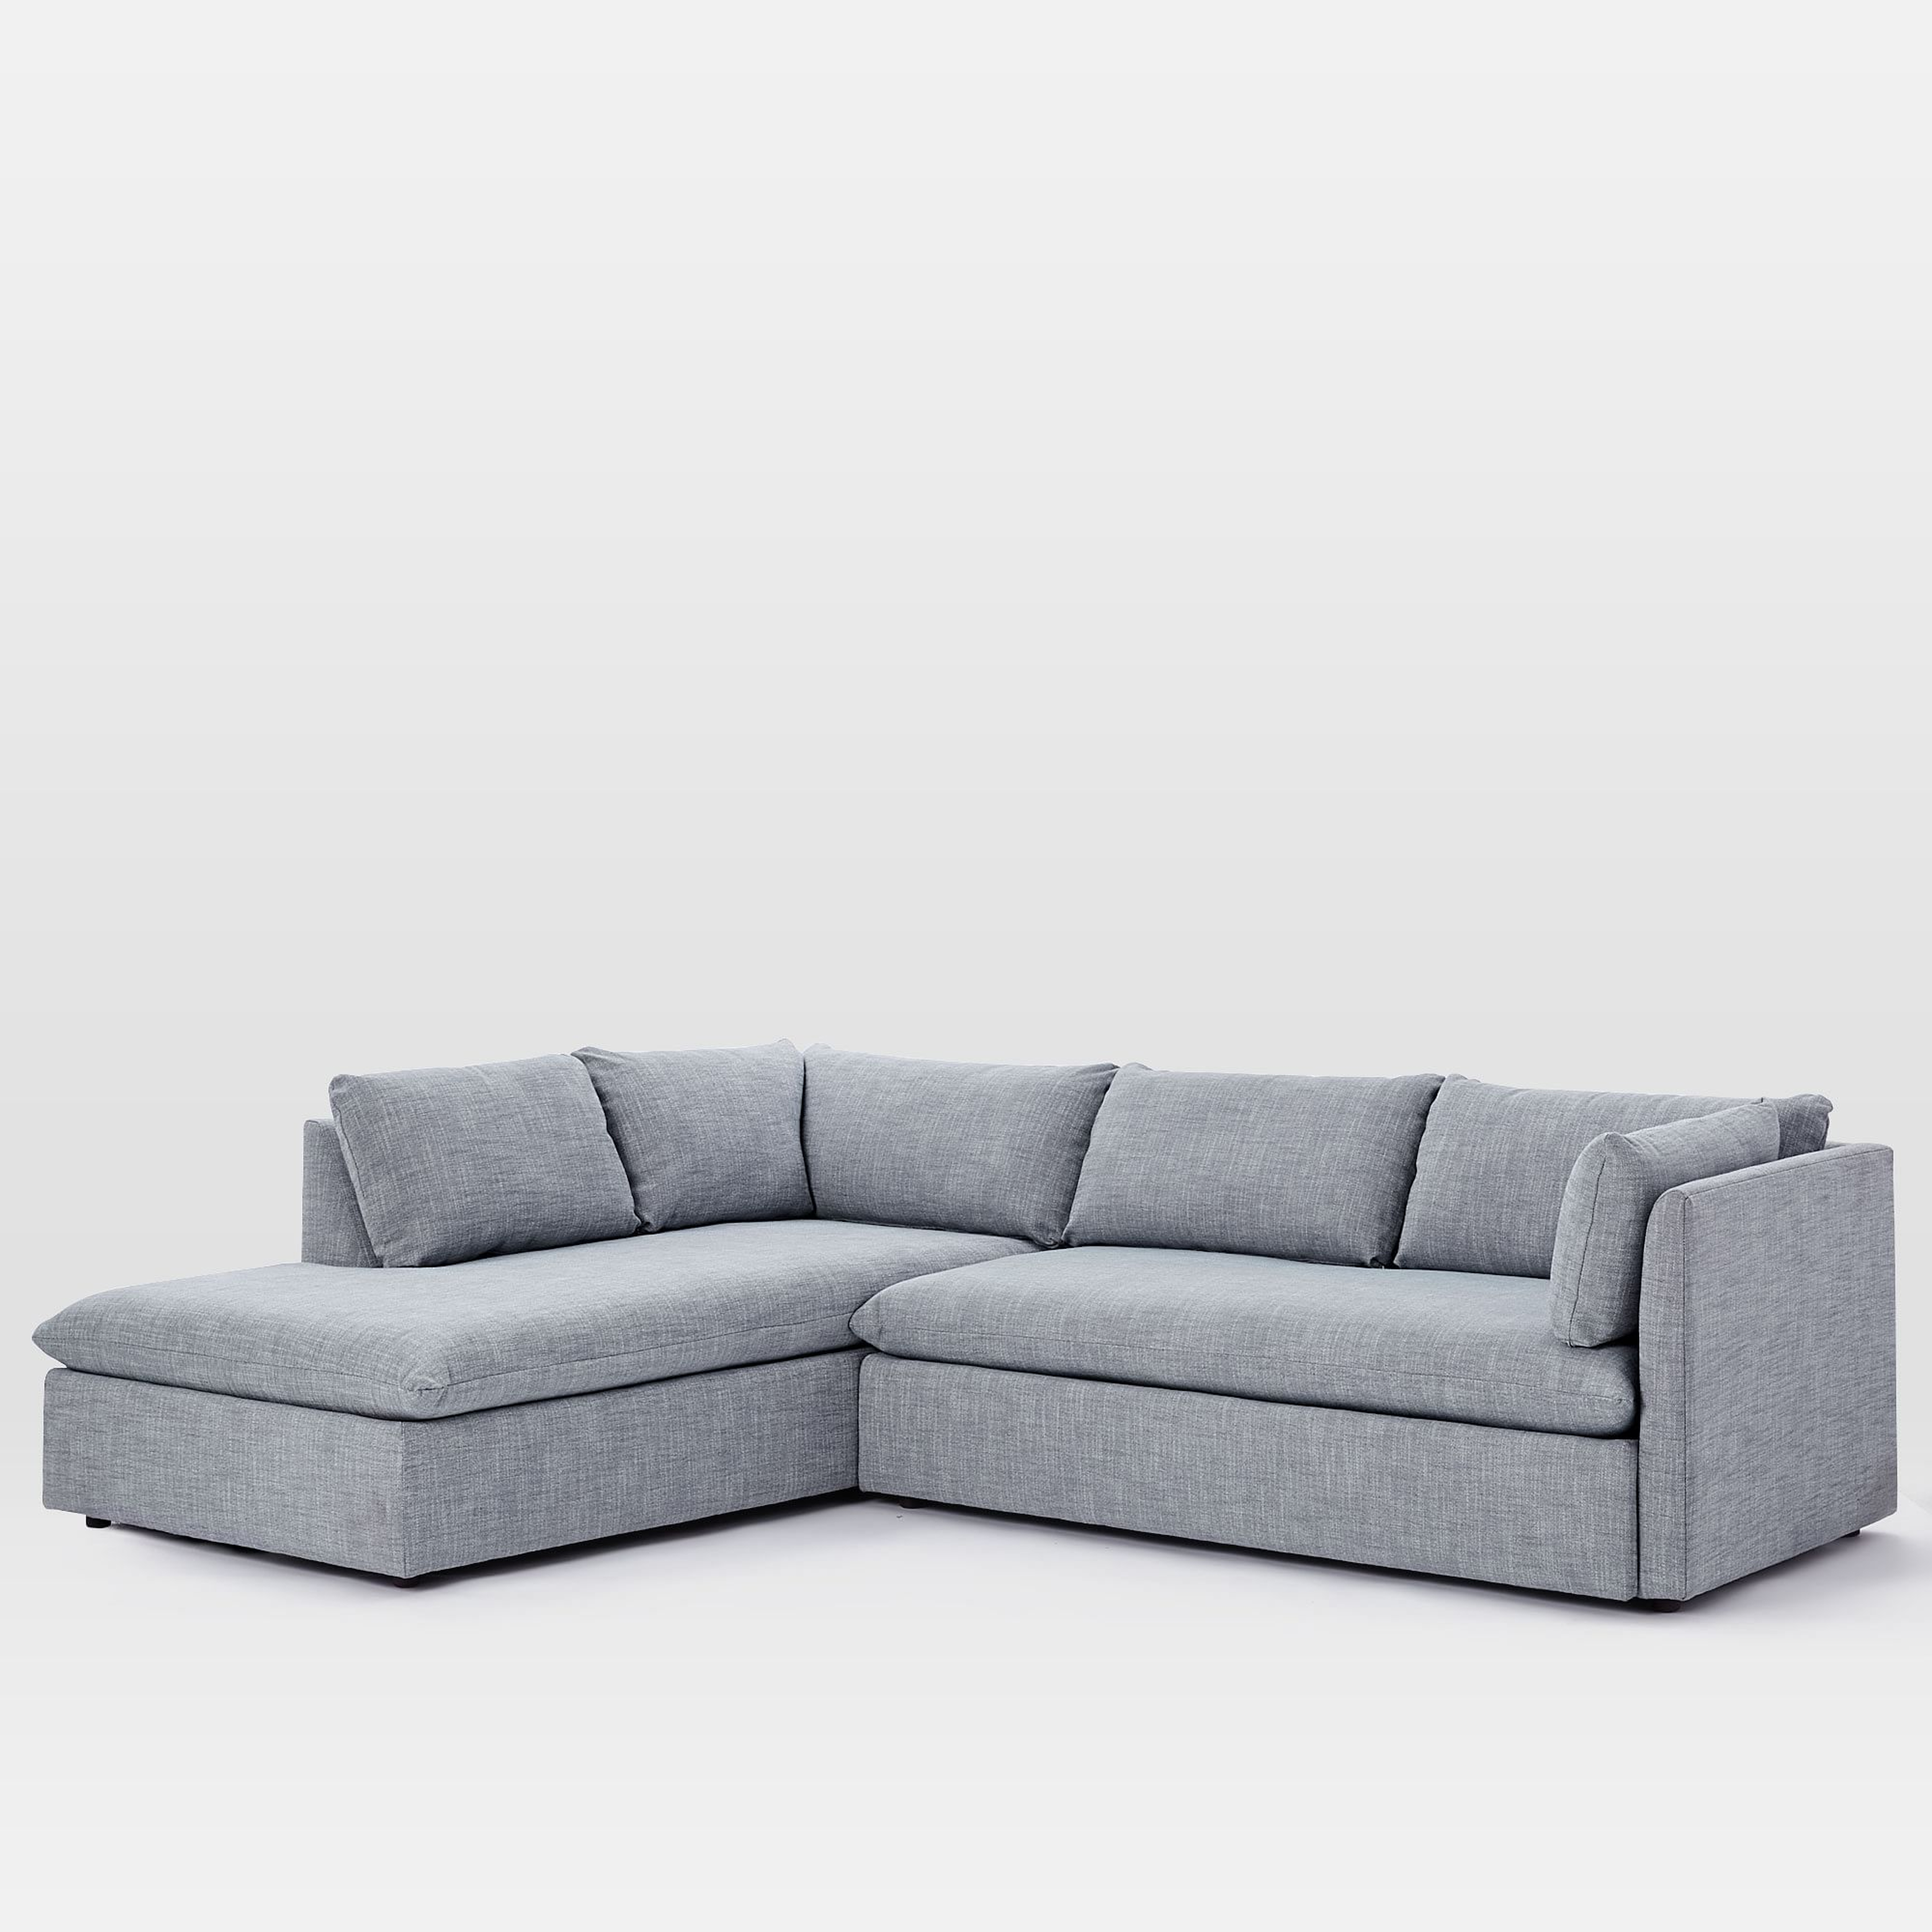 Shelter 106" Left 2-Piece Bumper Chaise Sectional, Yarn Dyed Linen Weave, graphite - West Elm